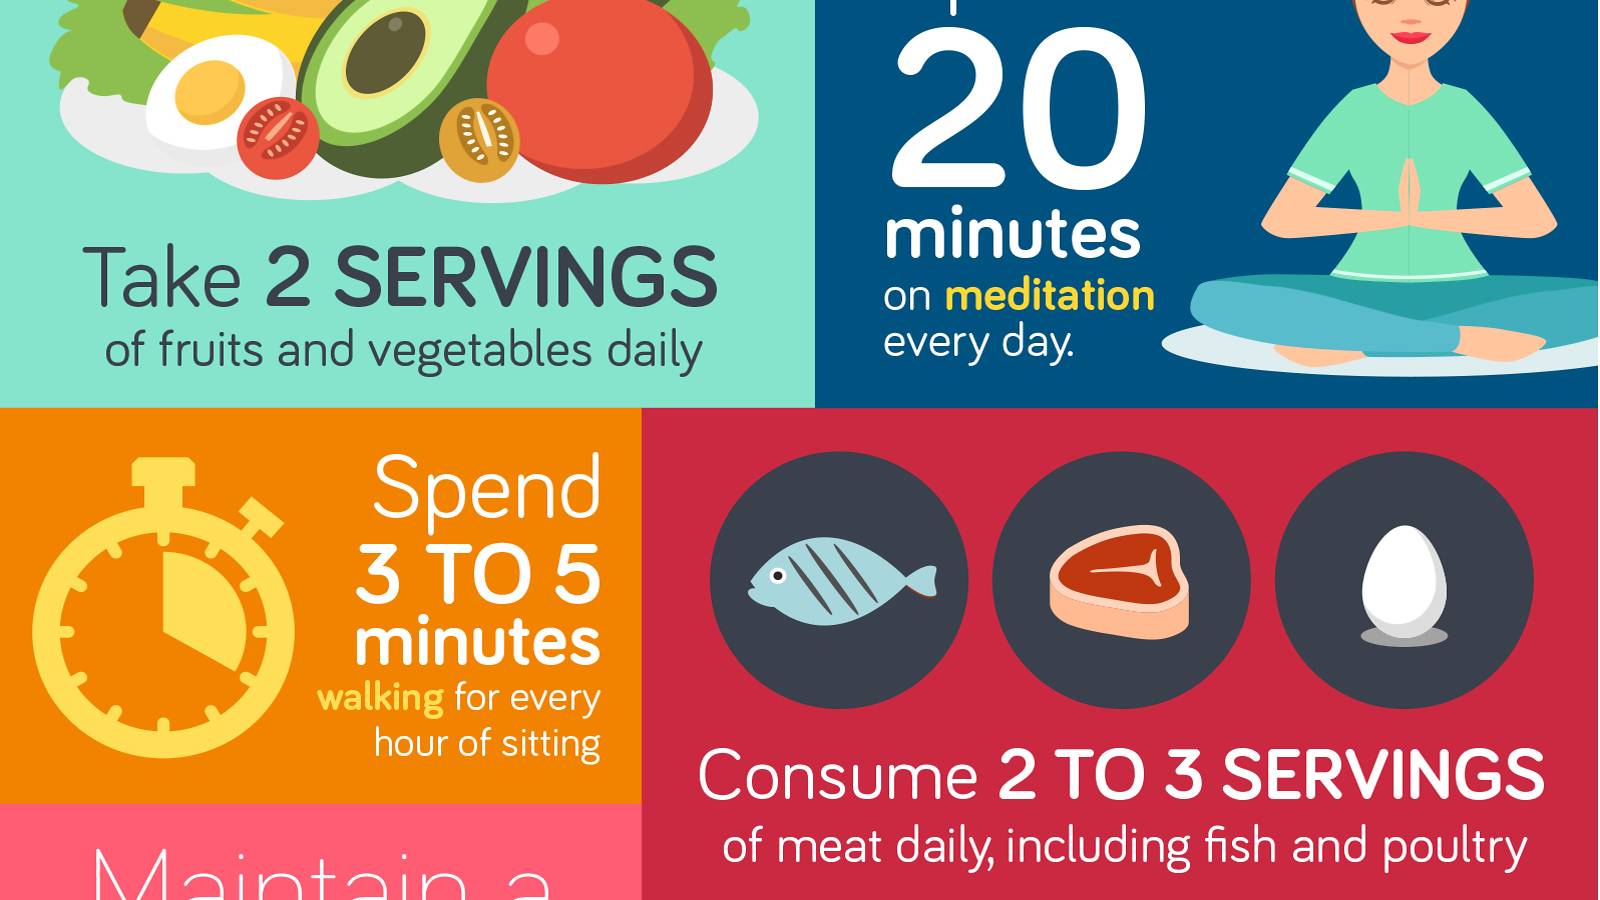 Parents-Healthy-habits-by-the-numbers-[Infographic]_sliced_03